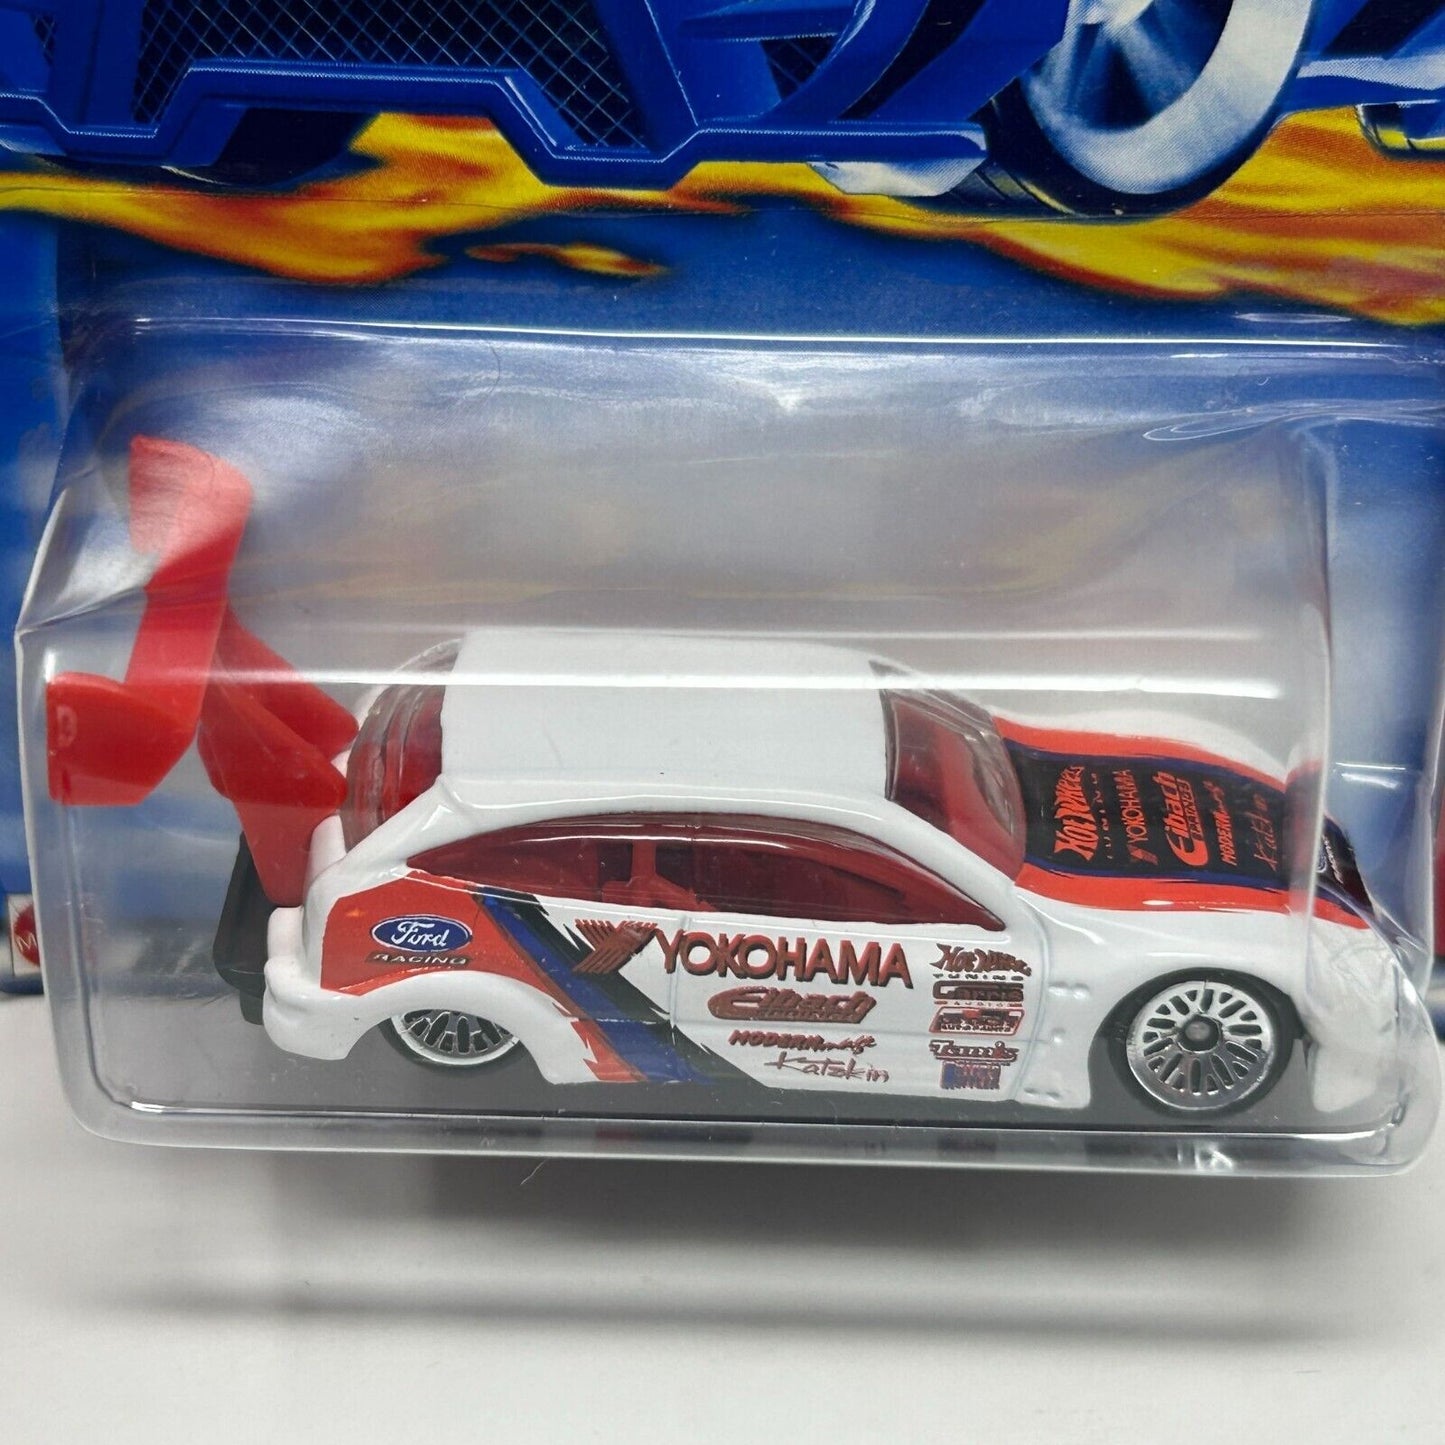 Ford Focus Tuners Hot Wheels Collectible Diecast Car White Vintage 2002 New